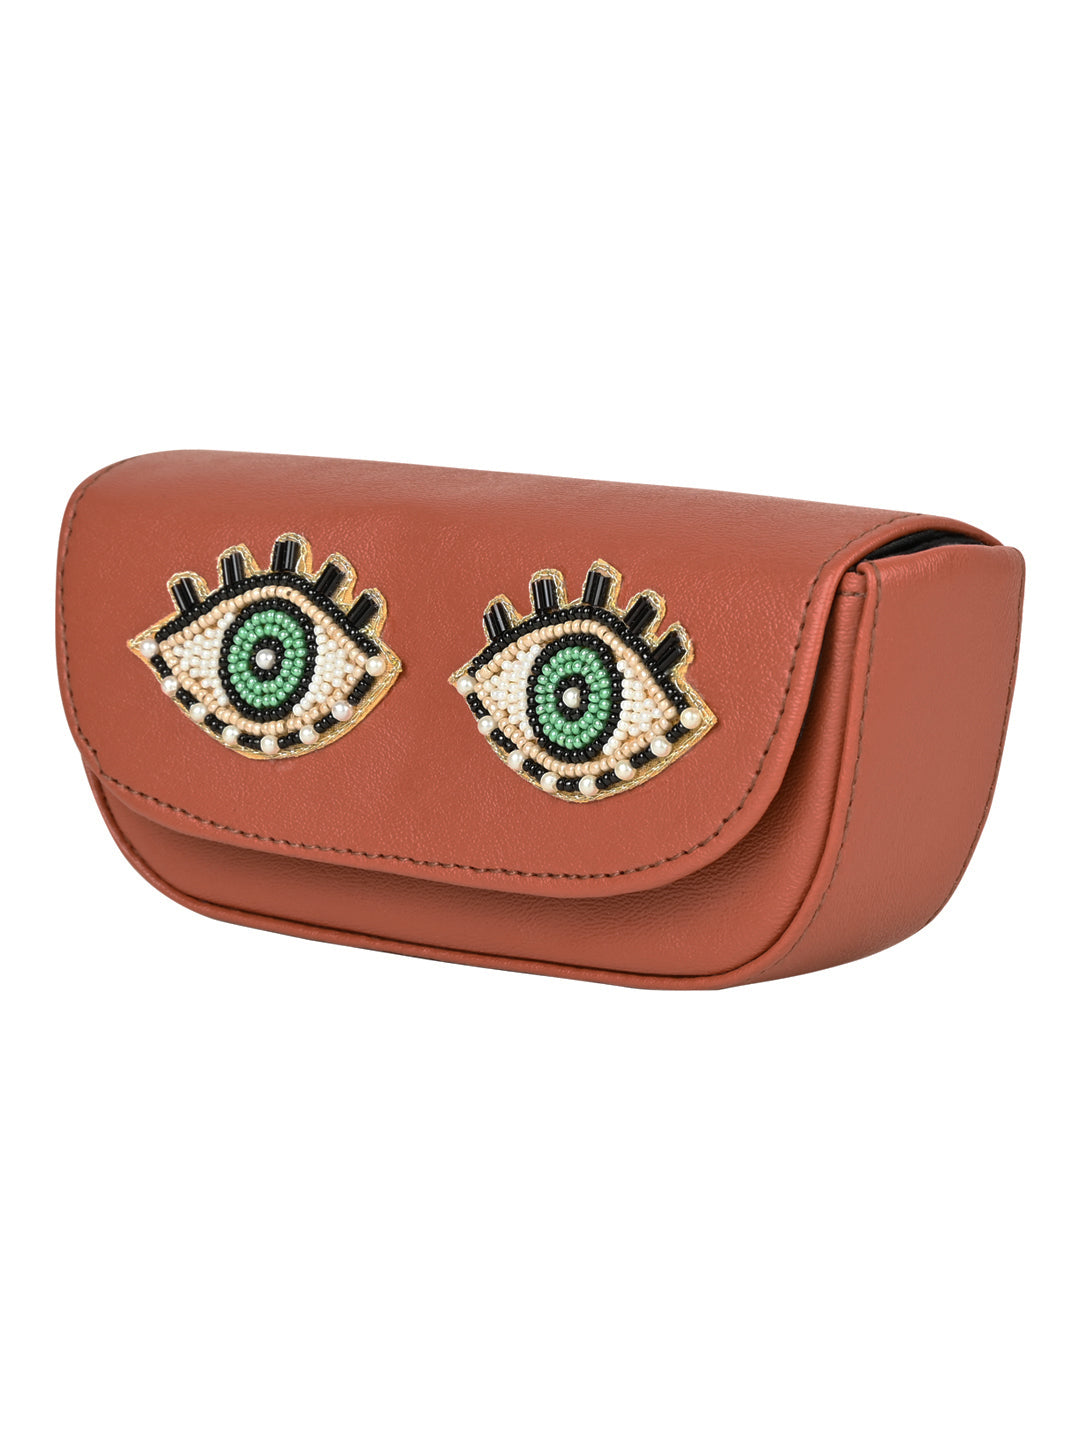 Protect your sunglasses with flair in our fashionable sunglass case. 